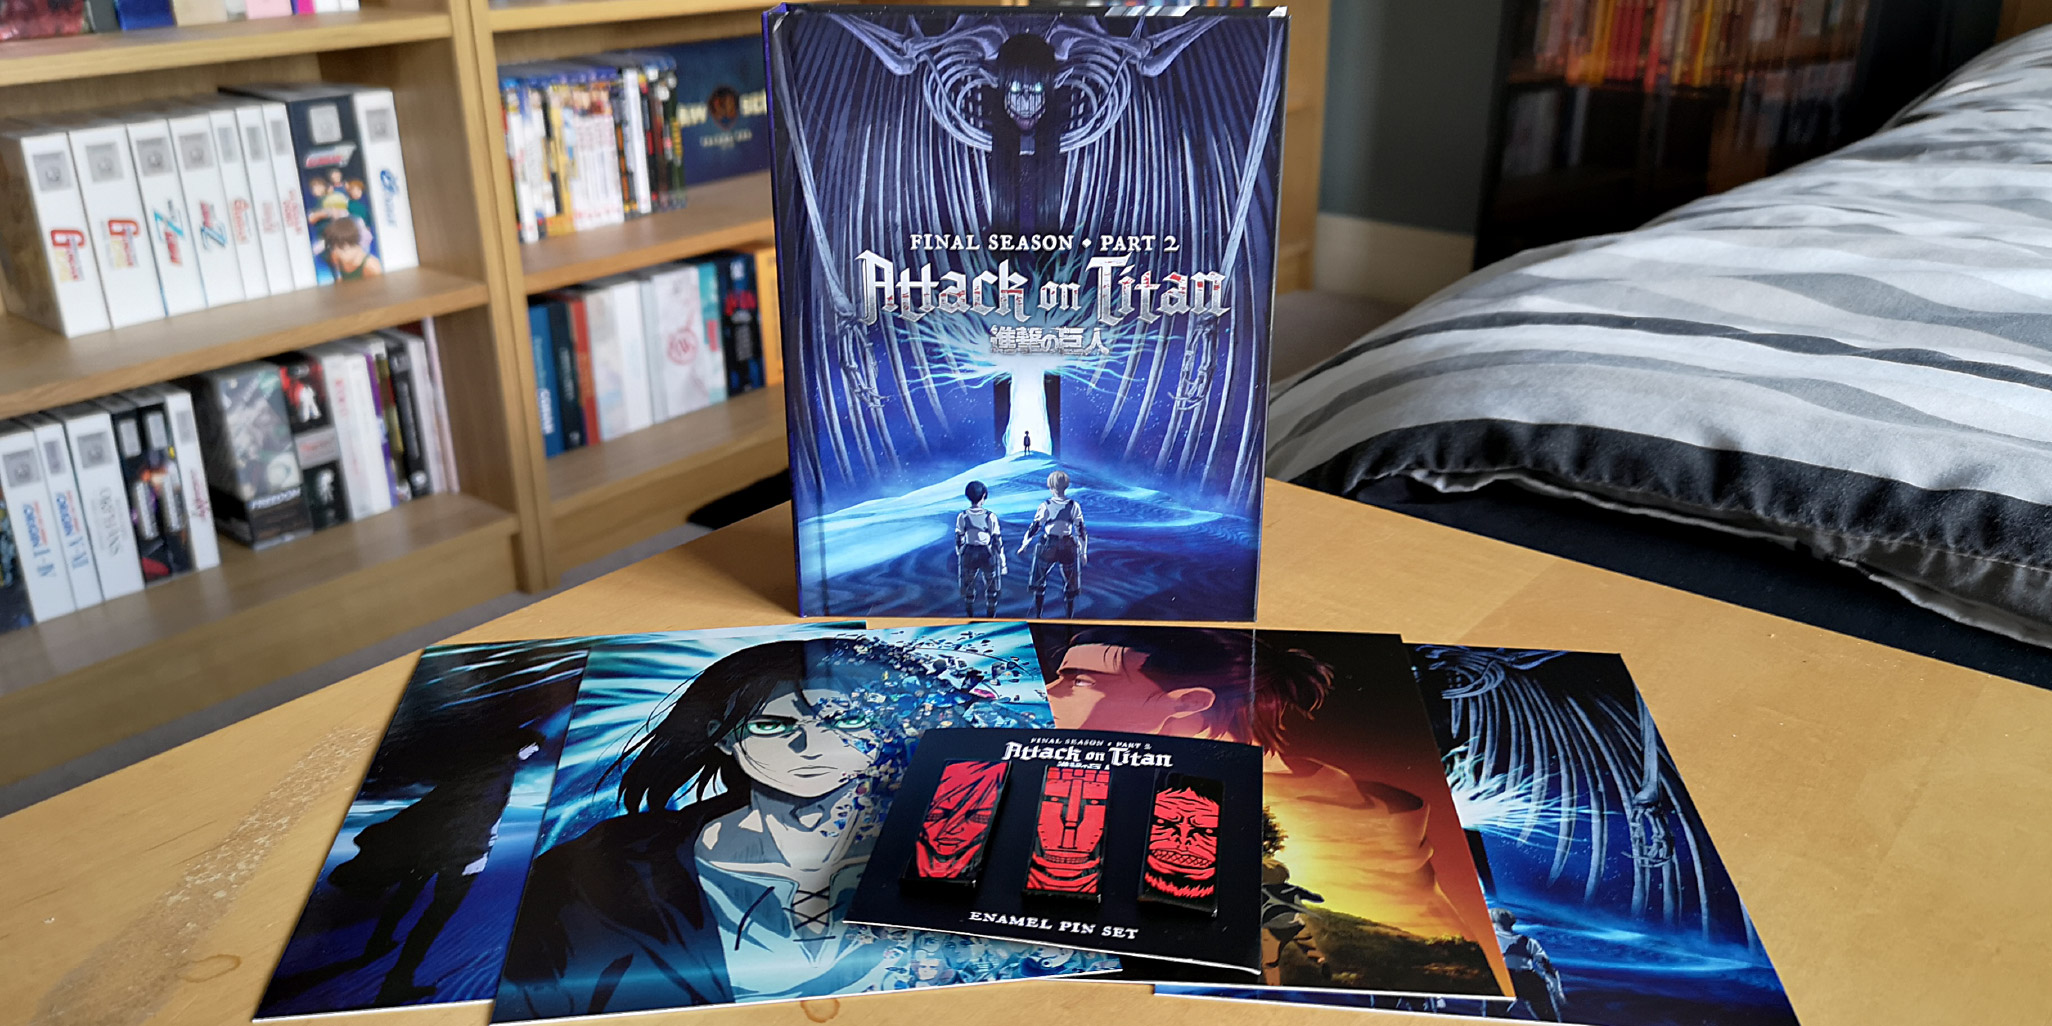 Attack on Titan, Part 2 (Limited Edition Blu-ray/DVD Combo)